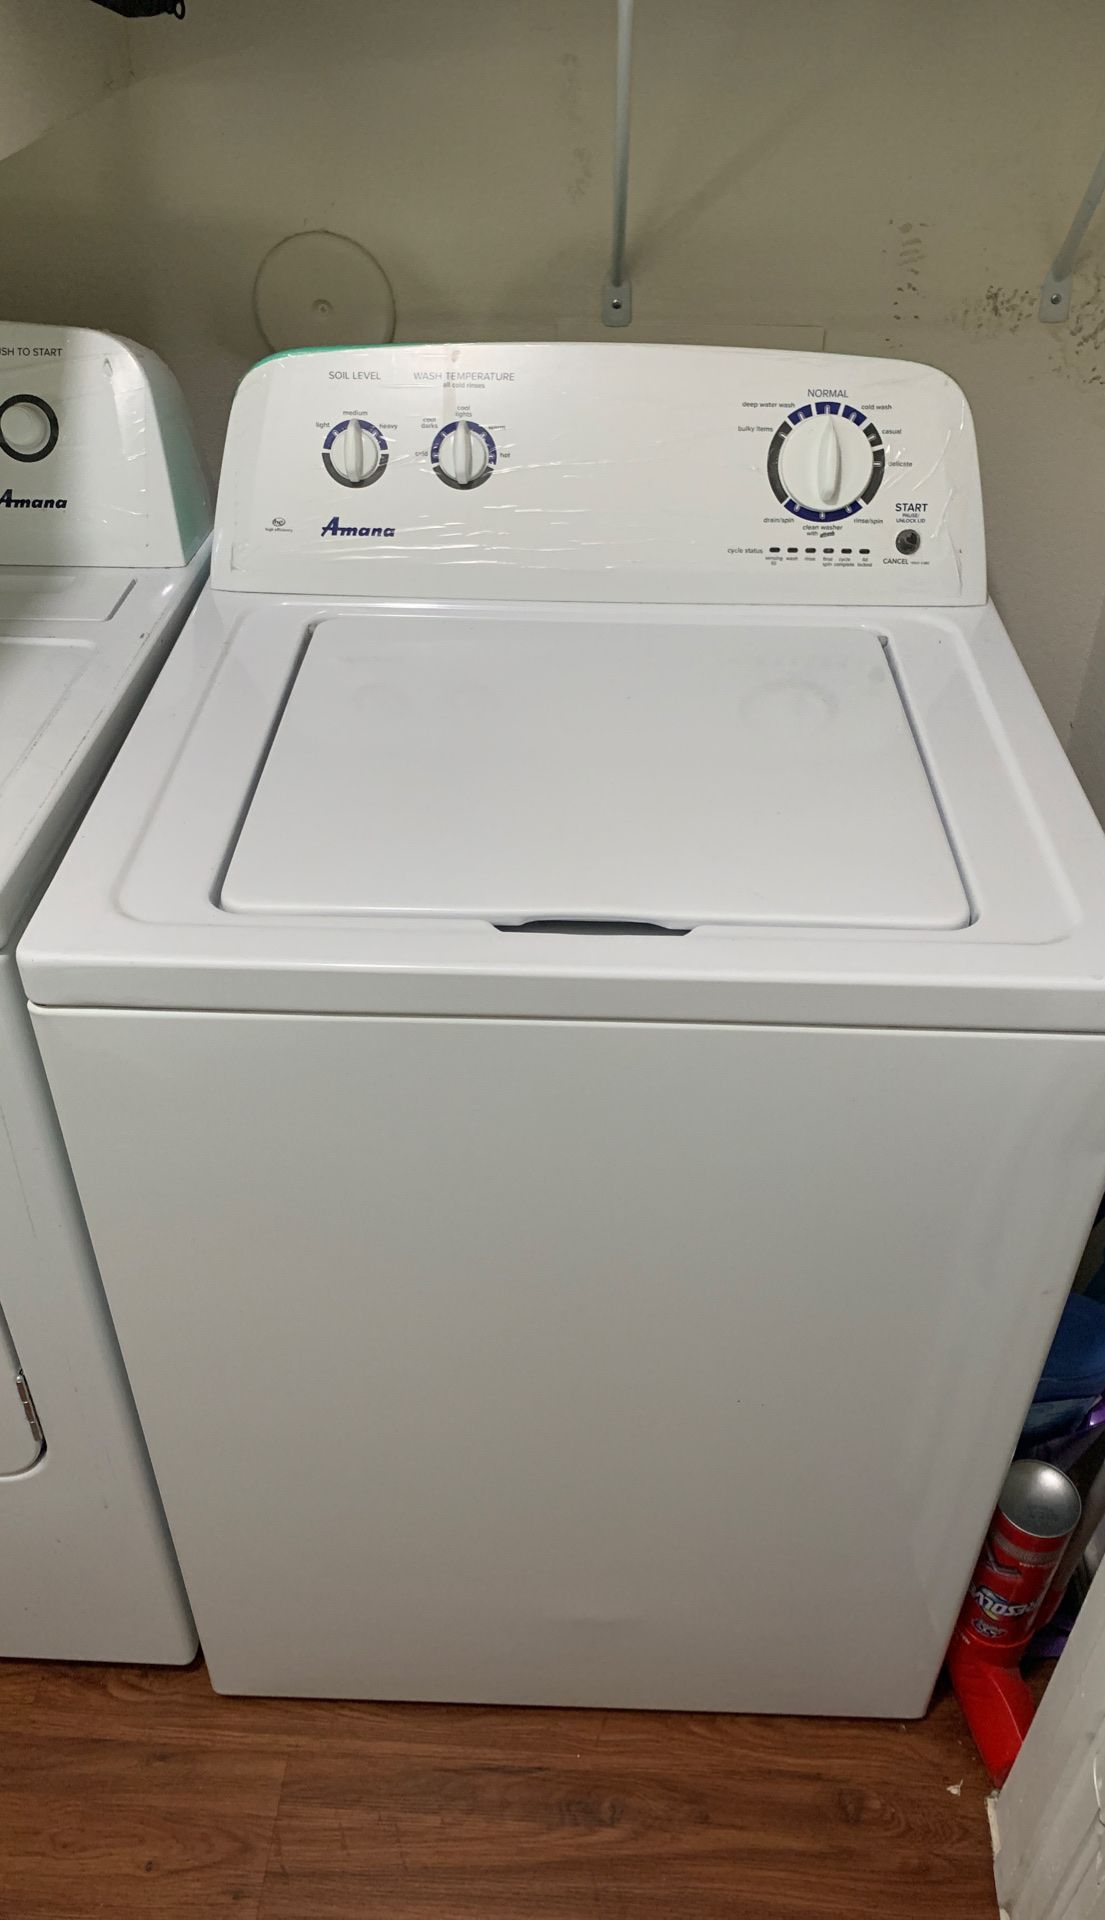 Laundry washer and dryer